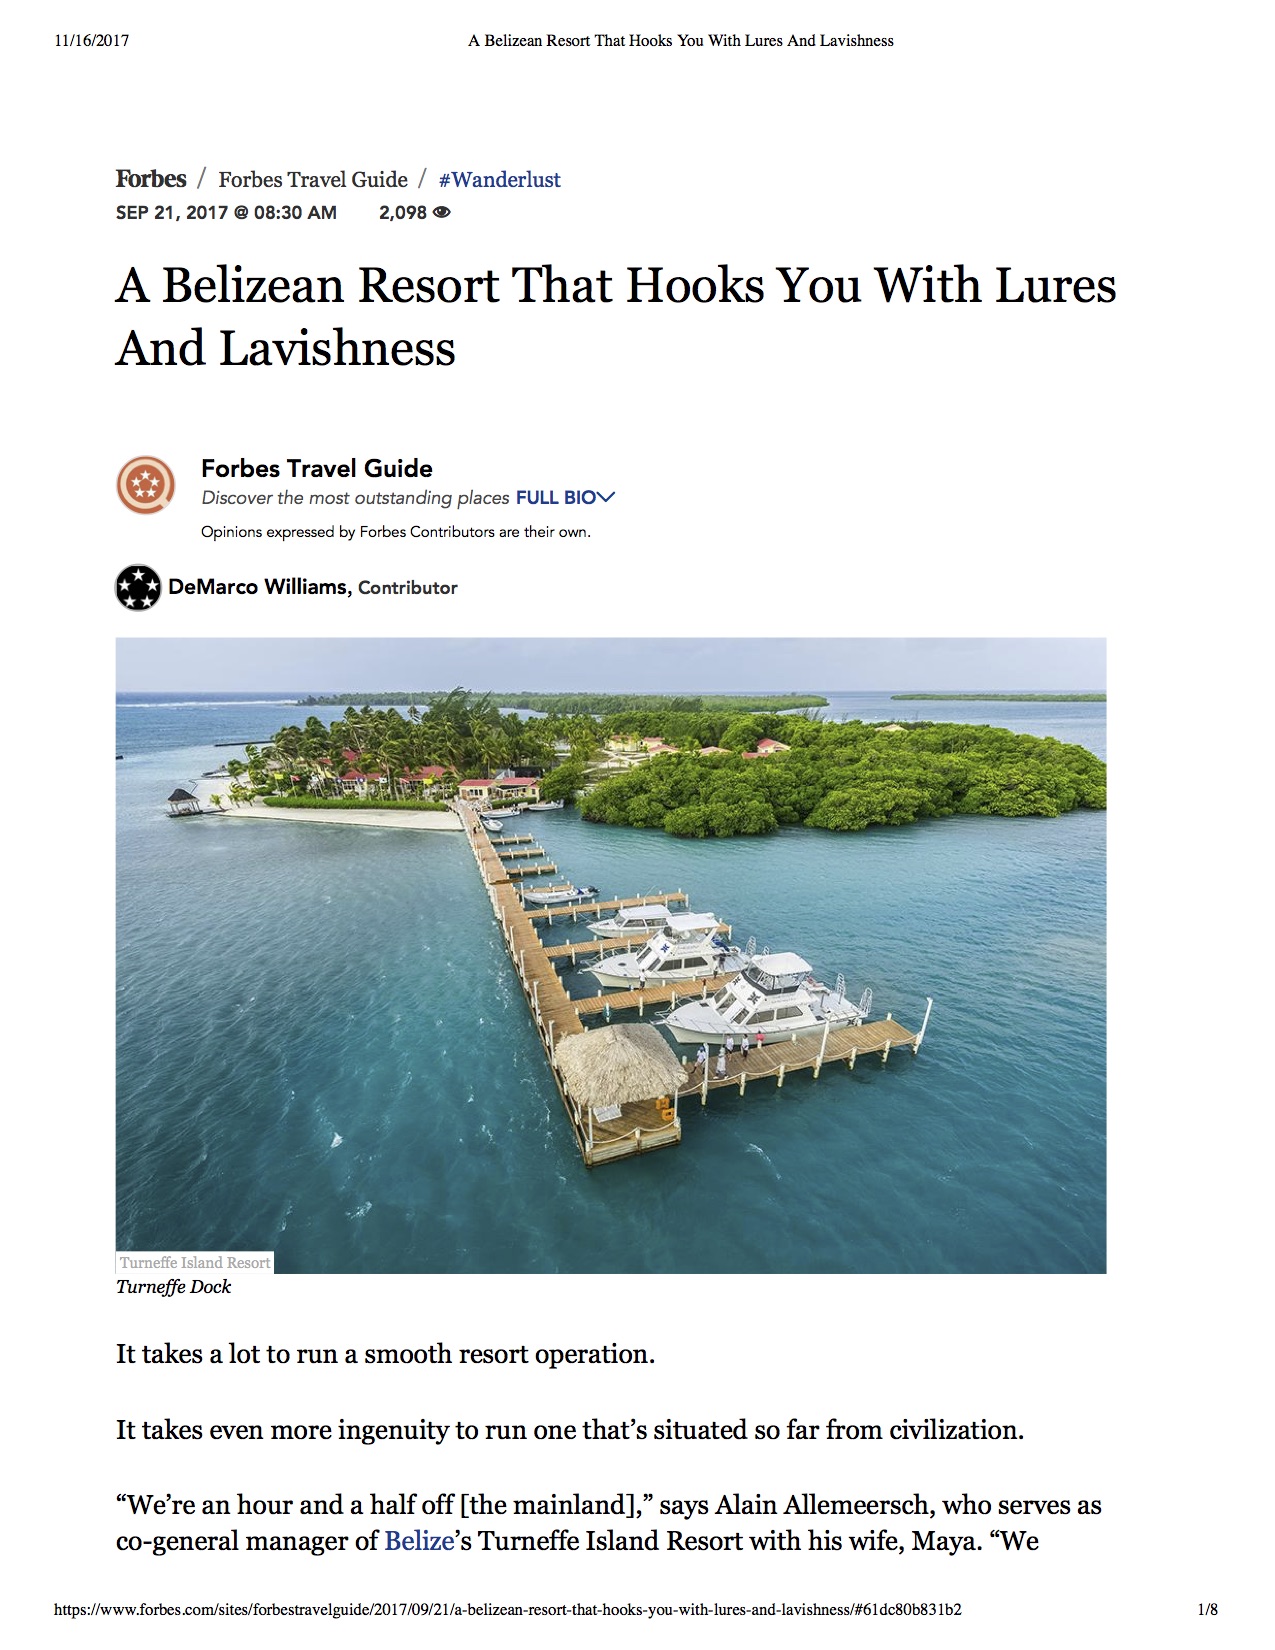 Belize Dive Resort by Forbes 